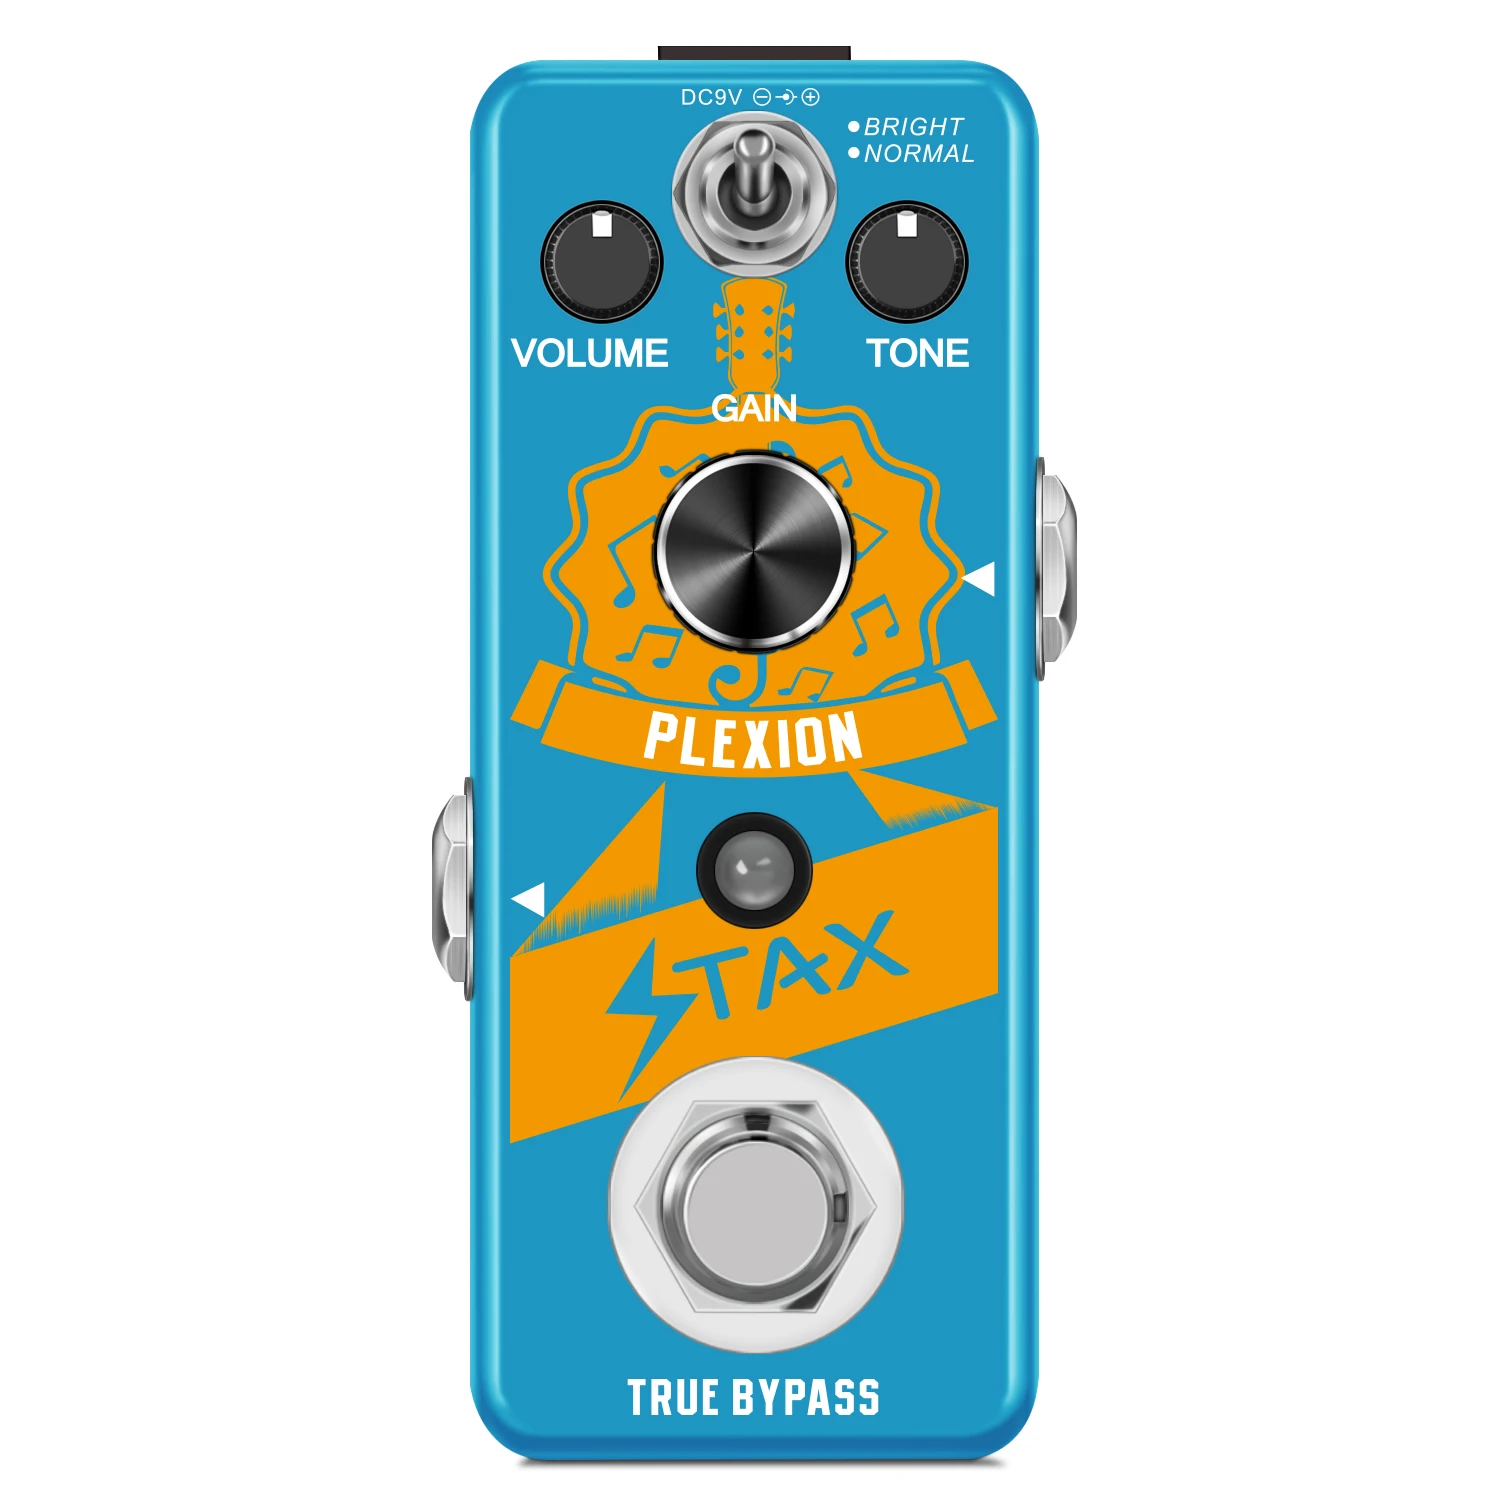 

Stax LEF-324 Plexion Distortion Pedal for Guitar & Bass with Bright and Normal Mode True Bypass